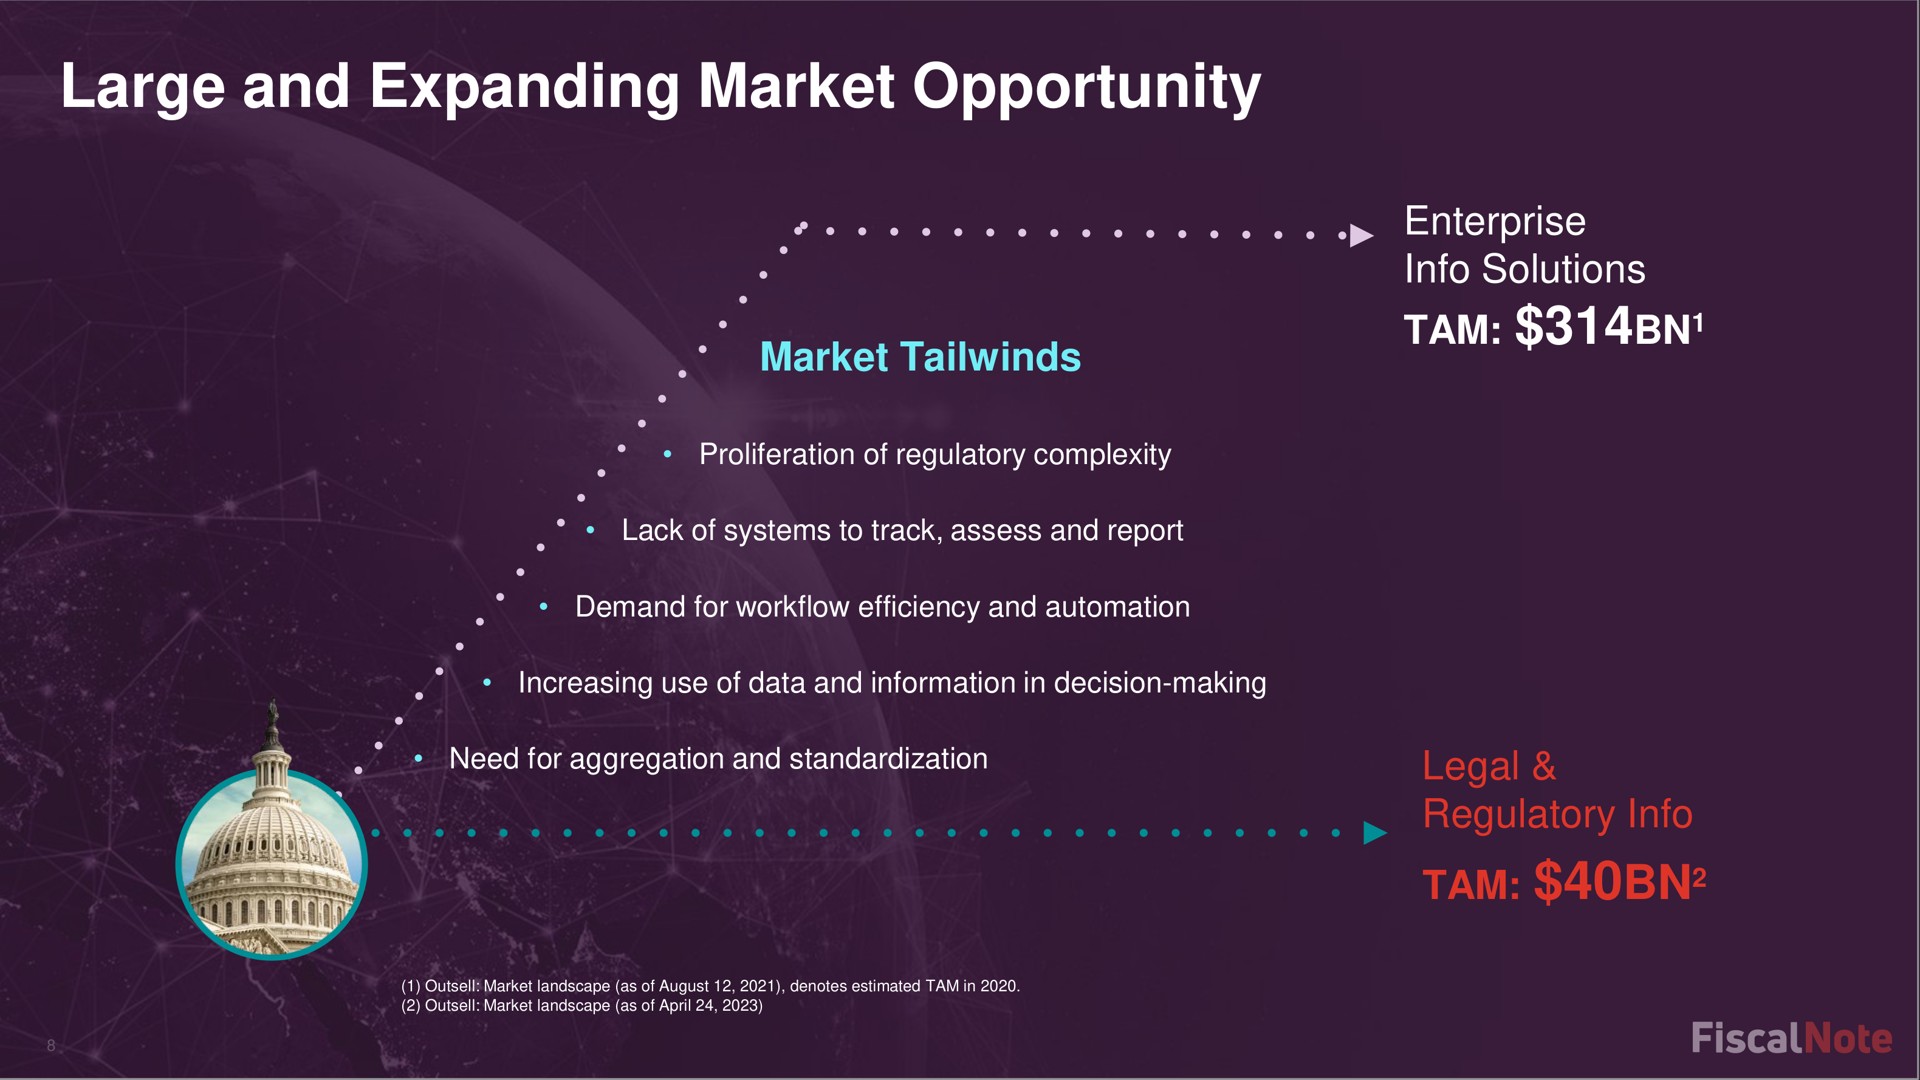 large and expanding market opportunity market enterprise solutions tam legal regulatory tam fiscal | FiscalNote